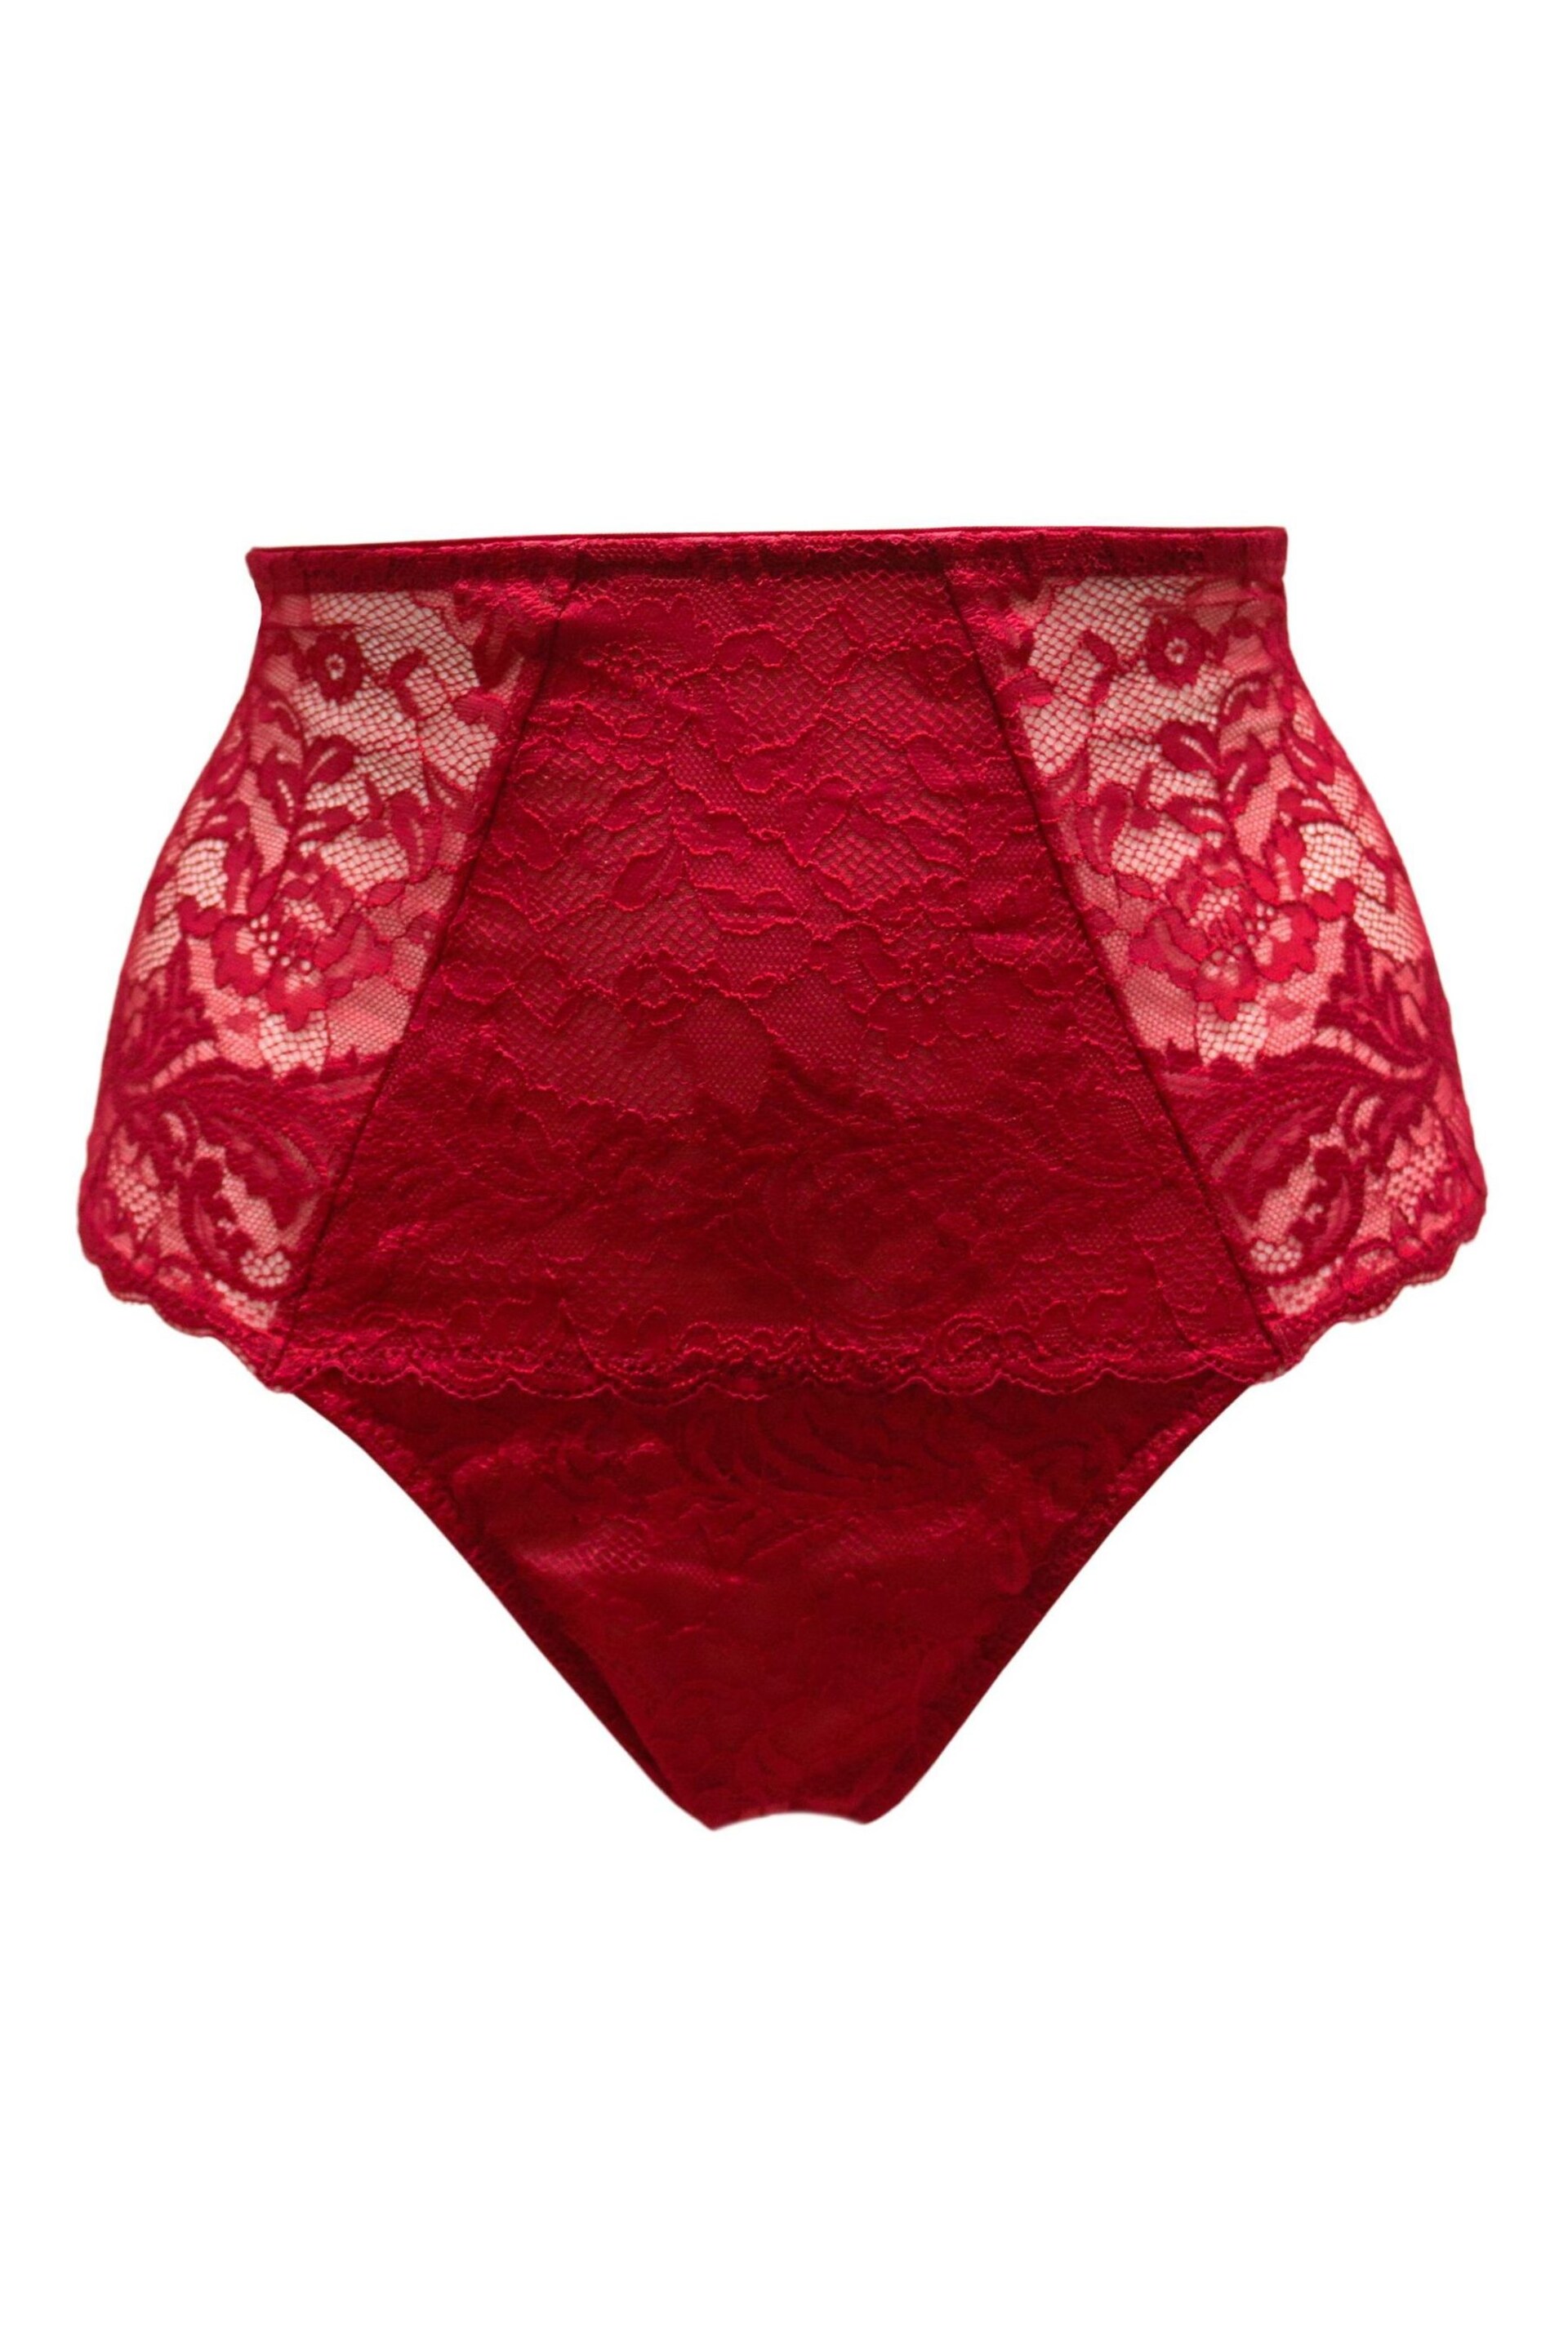 Pour Moi Red For Your Eyes Only High Waist Crotchless Thong - Image 3 of 4